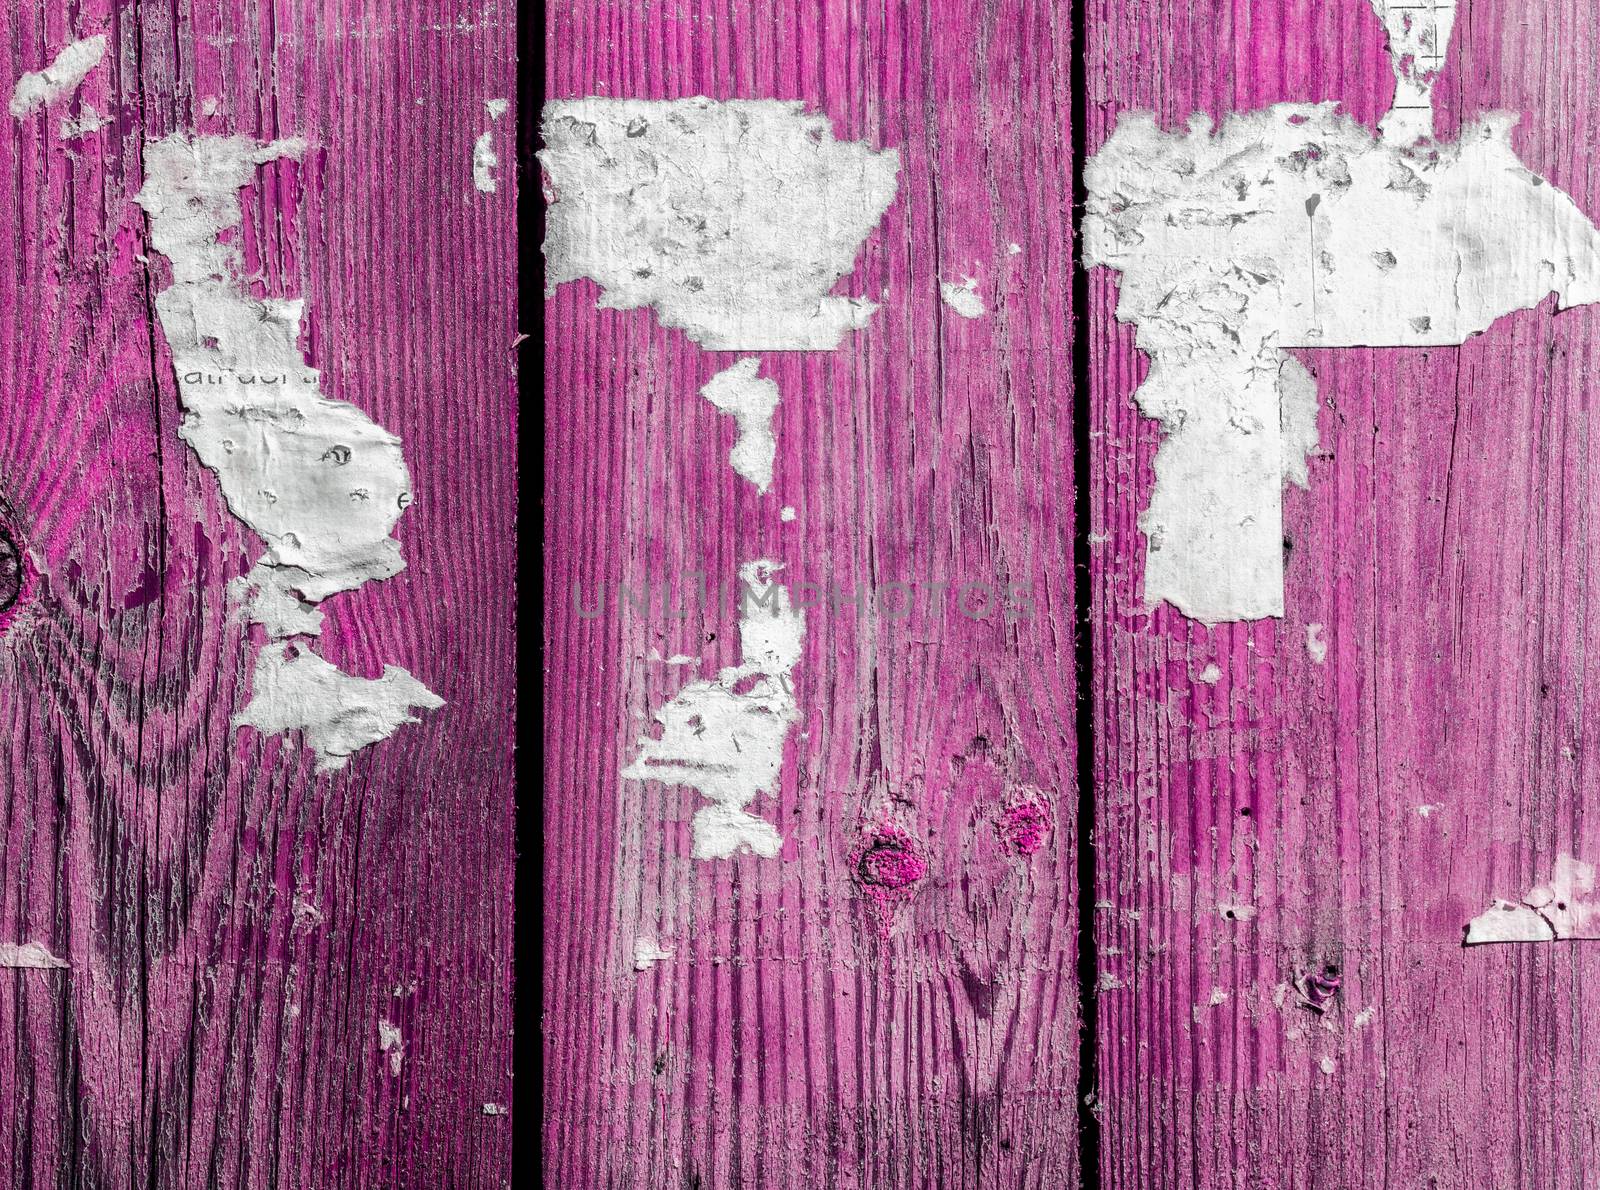 Wooden abstract background with light, scratches and newspaper pieces.